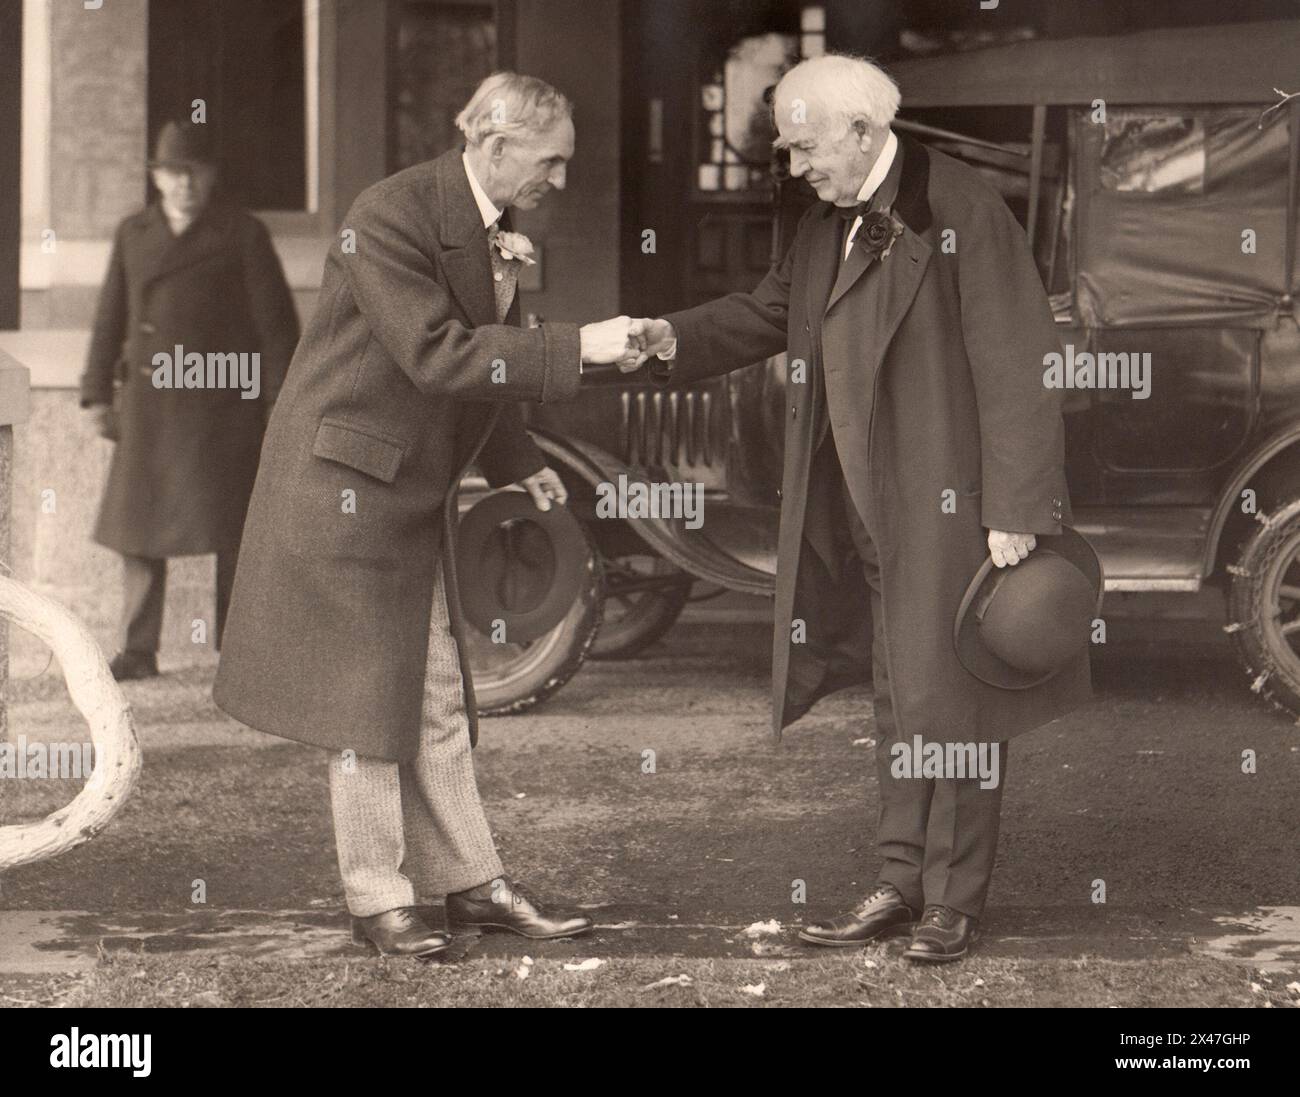 Henry Ford shaking hands with Thomas Edison in front of Edison's Glenmont Estate in West Orange, New Jersey, on the latter's 80th birthday, February 11, 1927. (USA) Stock Photo